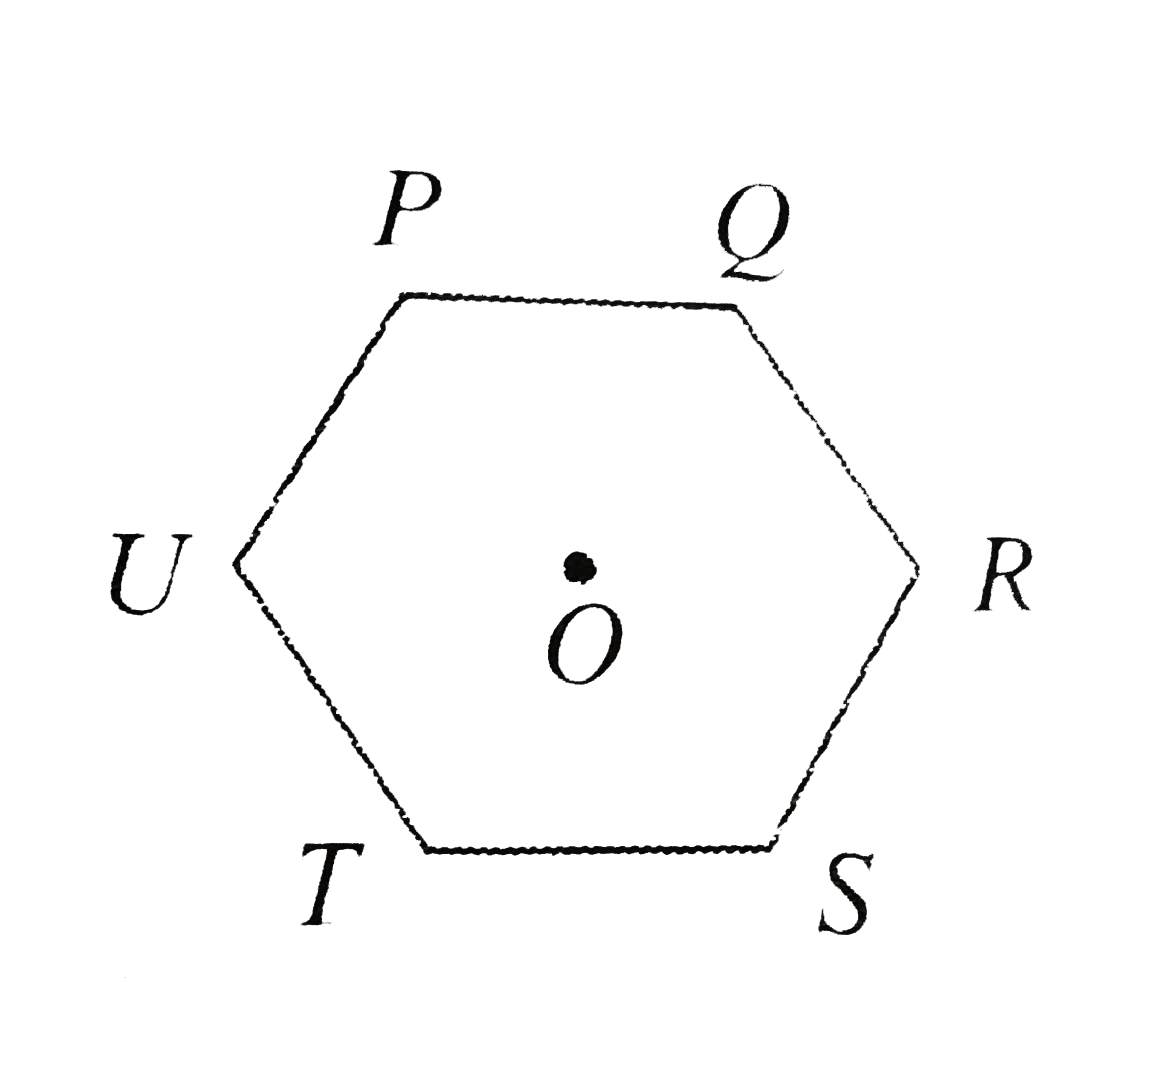 Six charges of equal magnitude, three positive and three negative, are to be placed on PQRSTU corners of a regular hexagon, such that field at the center is double that of what it would have been if only one positive charge is placed at R.